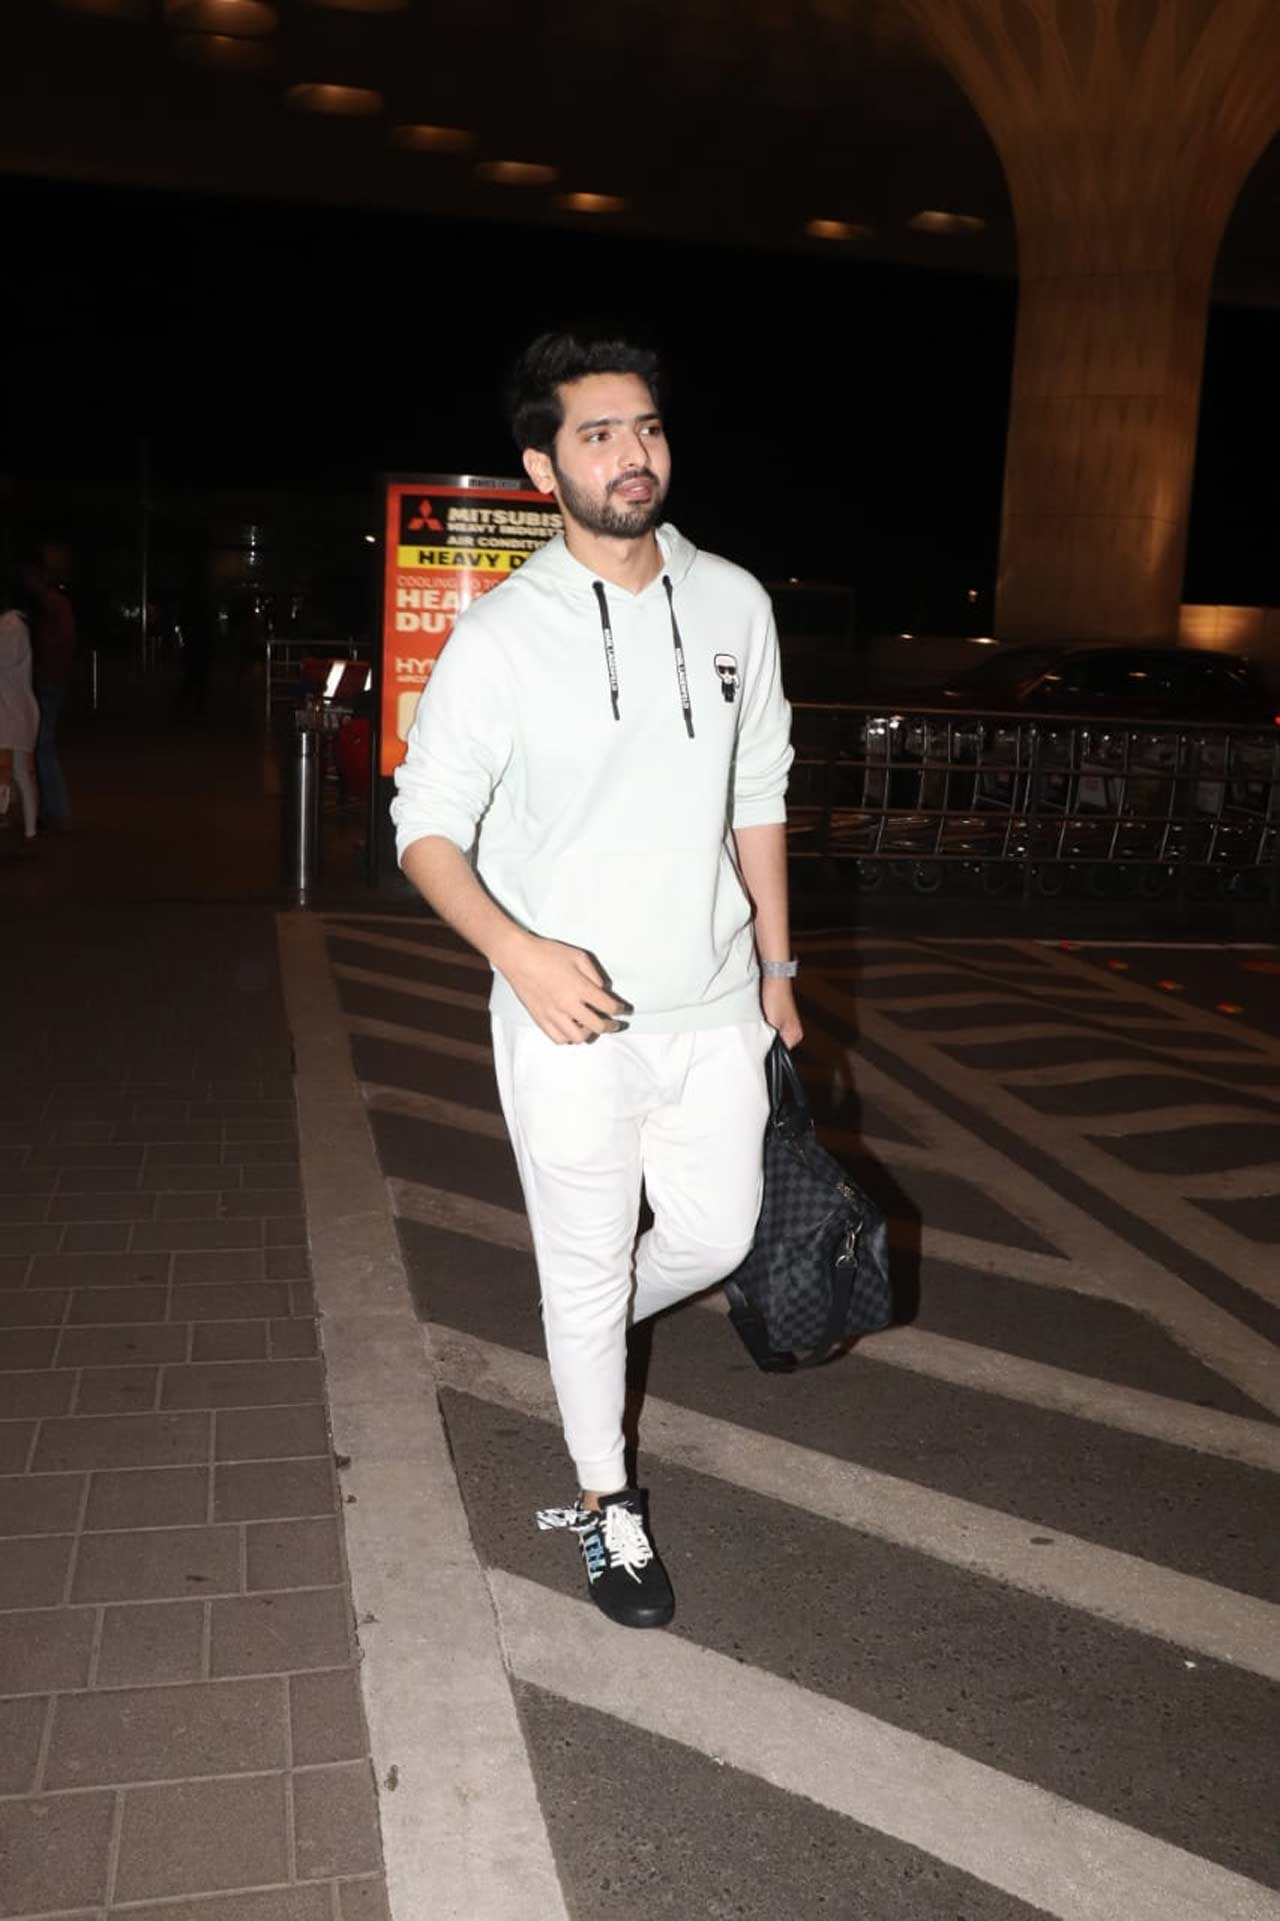 Popular Bollywood singer Armaan Malik was all smiles when snapped at the Mumbai airport.